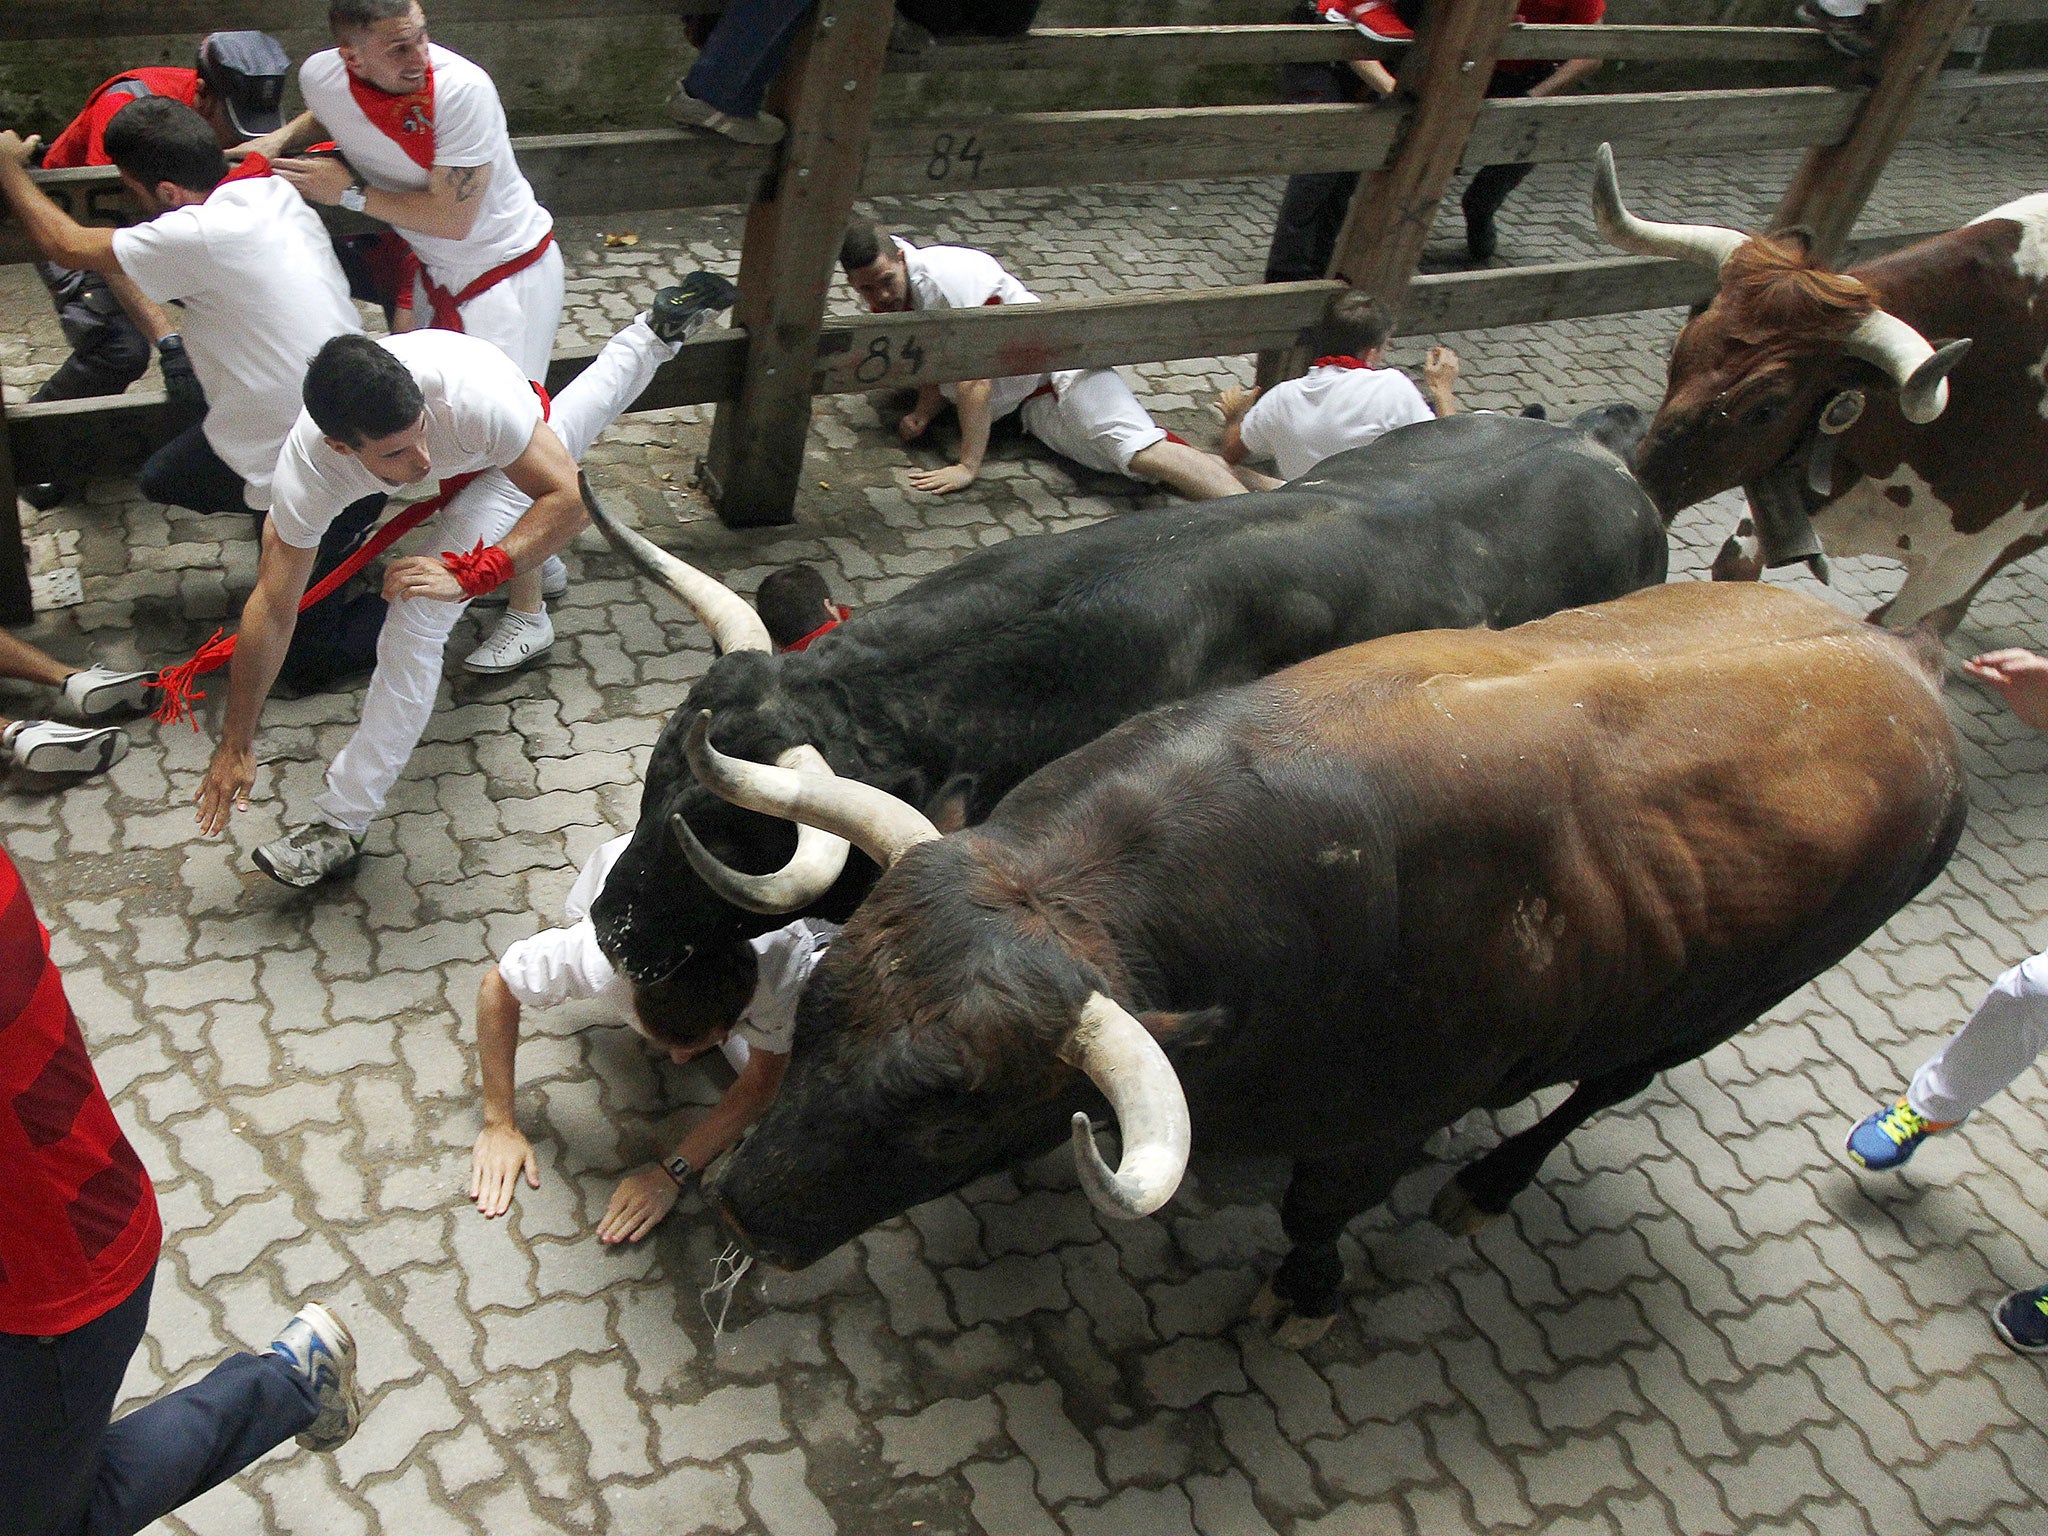 Thousands of visitors participate in the running of the bulls, or encierro - where they attempt to outrun the bulls along a 825 meter route through the narrow streets of the old city